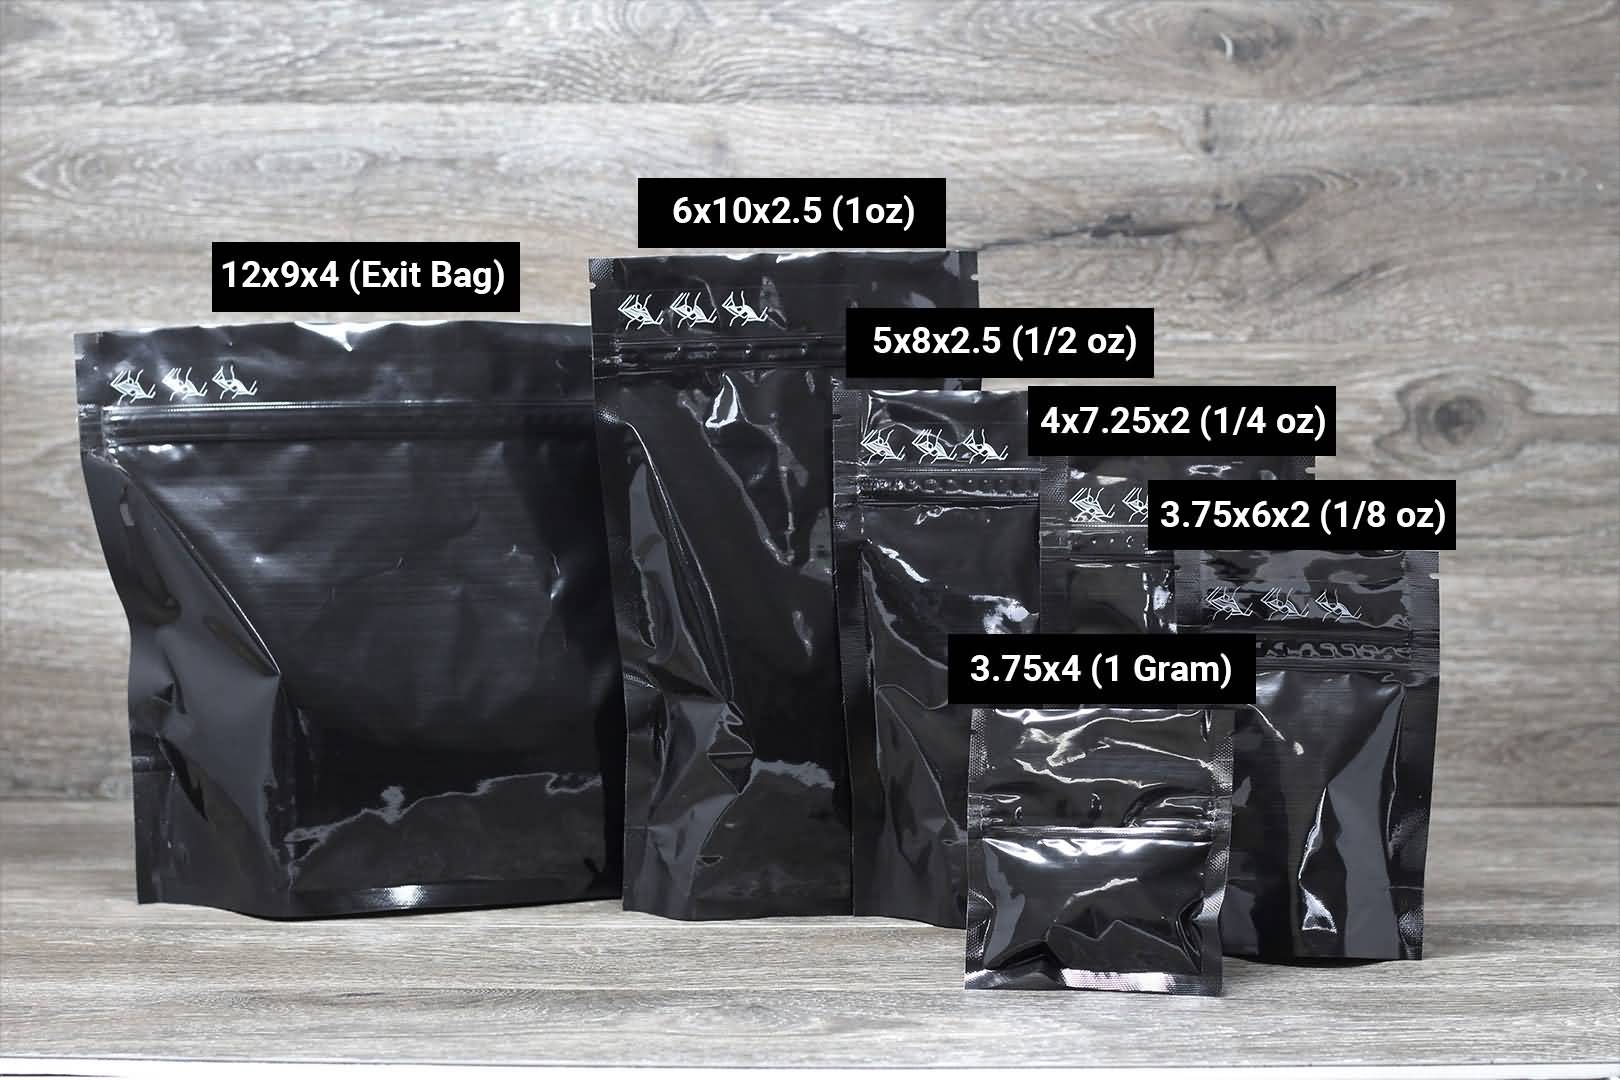 Black Child Resistant Pouch and Exit Bags